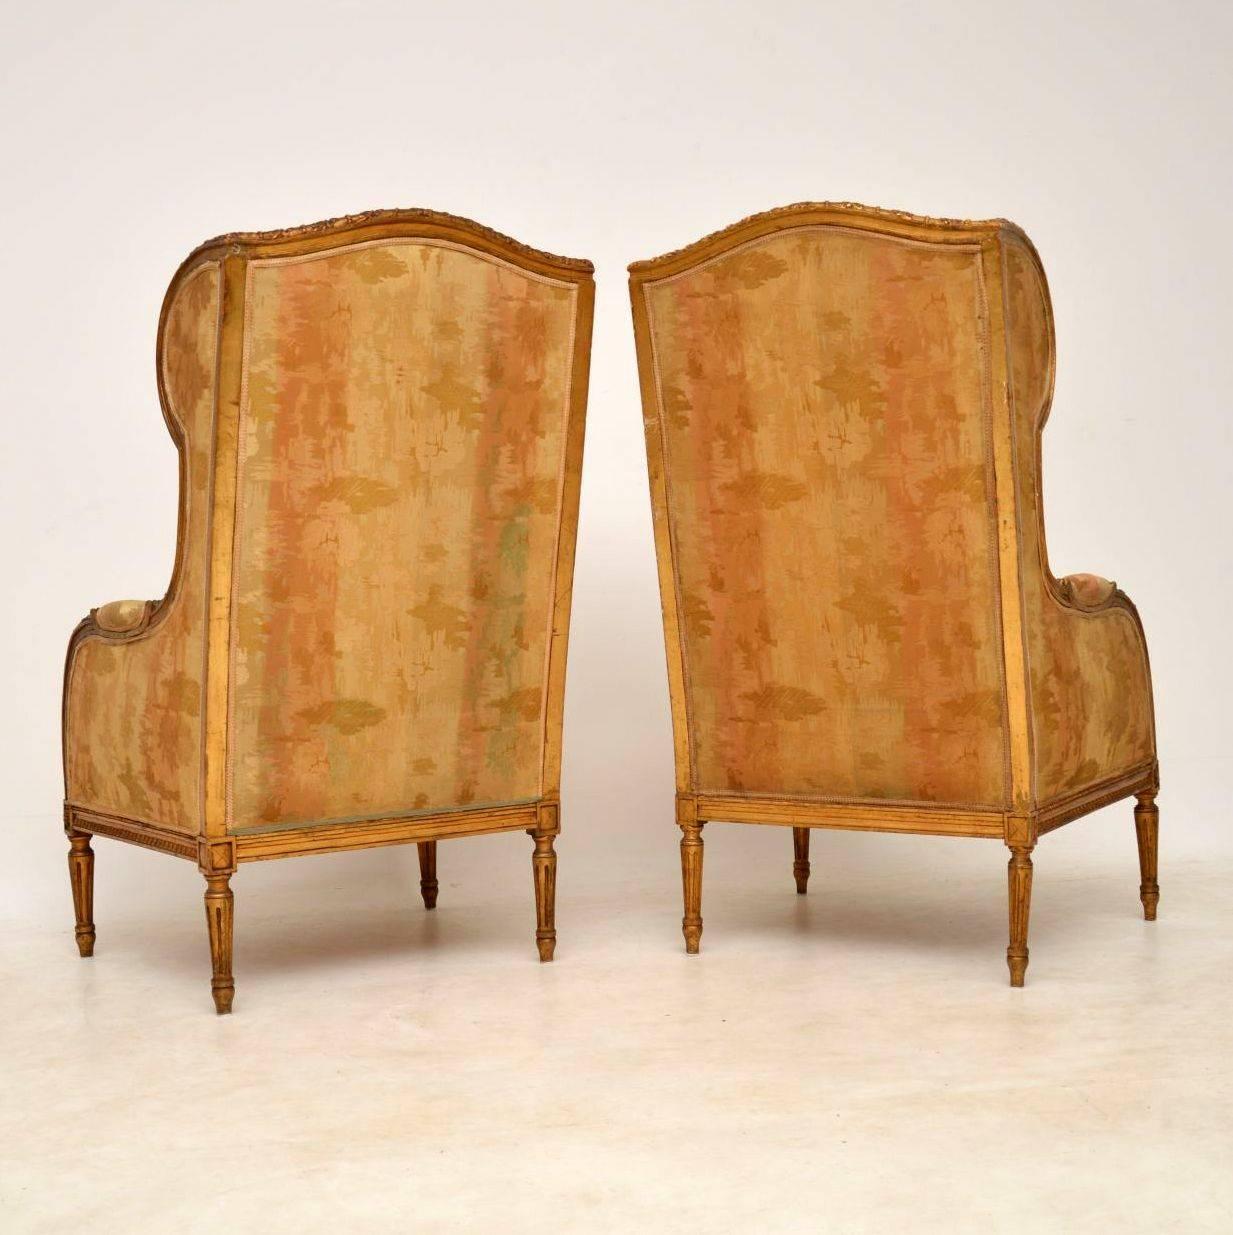 Stunning and rare pair of antique giltwood wing armchairs in original condition with what looks like the original fabric. They do need attention with regards to tightening up the frames, but this can’t be done successfully until they are